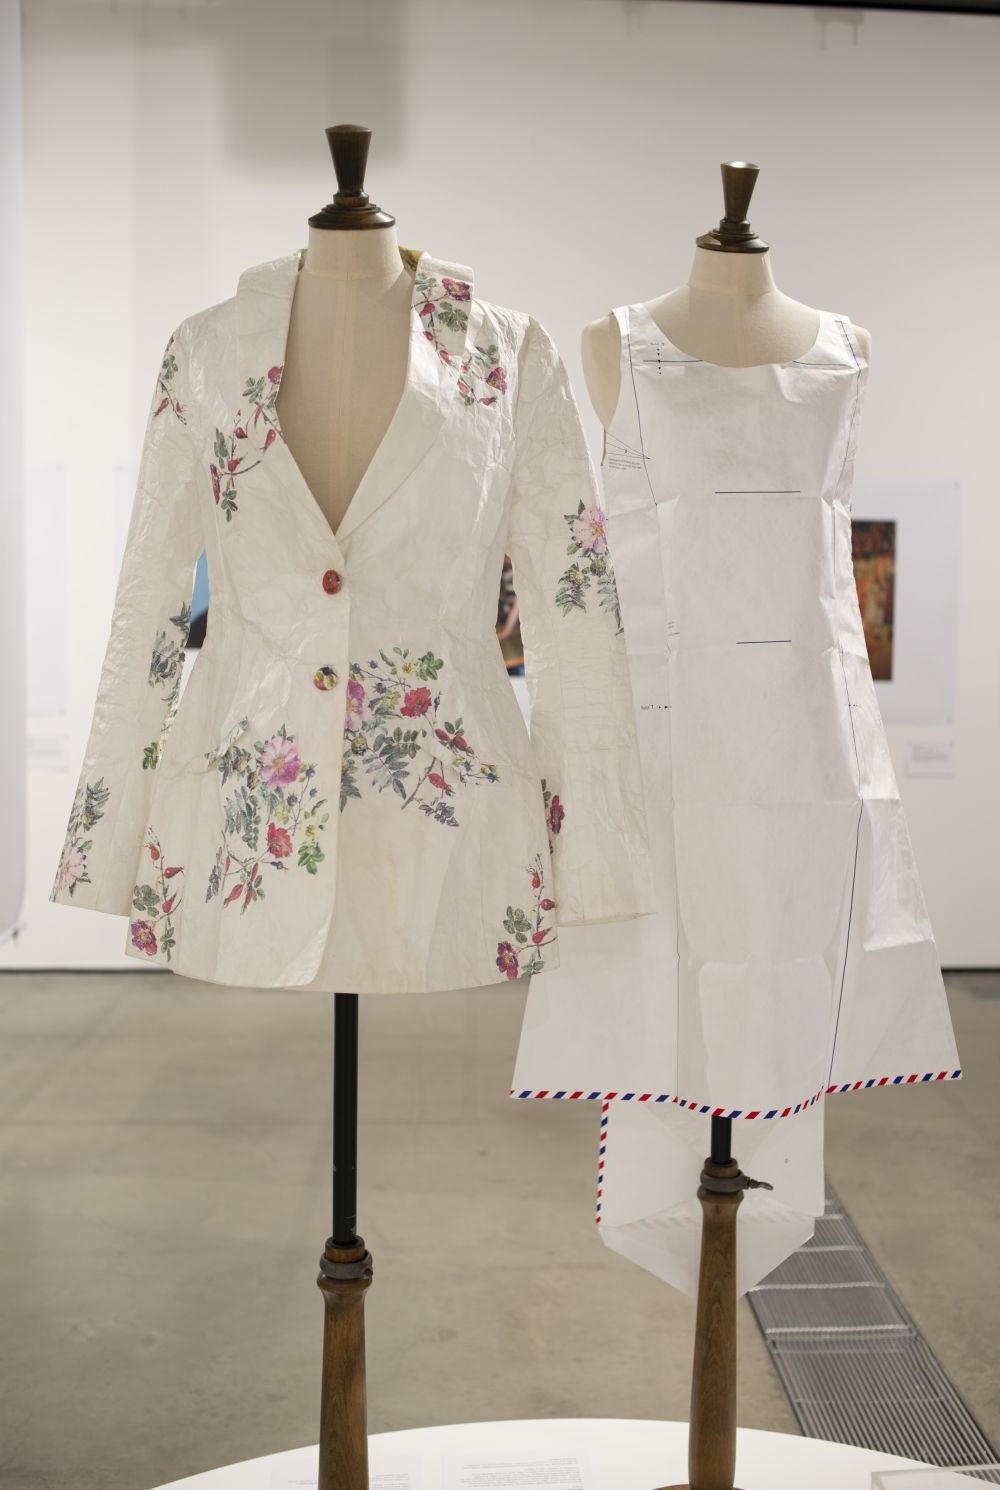 Two paper garments arranged on mannequins